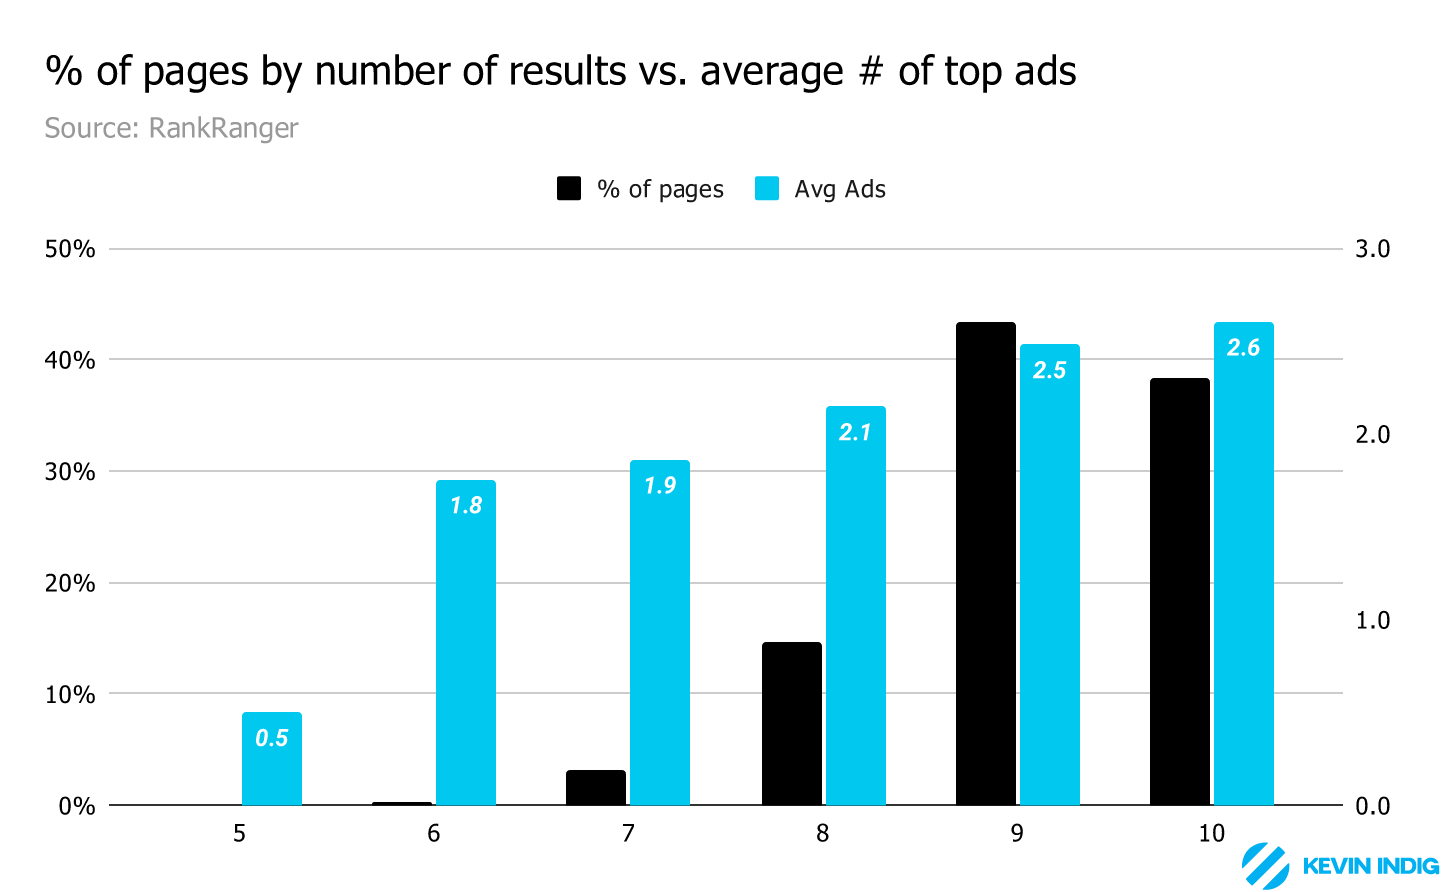 The % of pages with a certain number of results vs. top ads